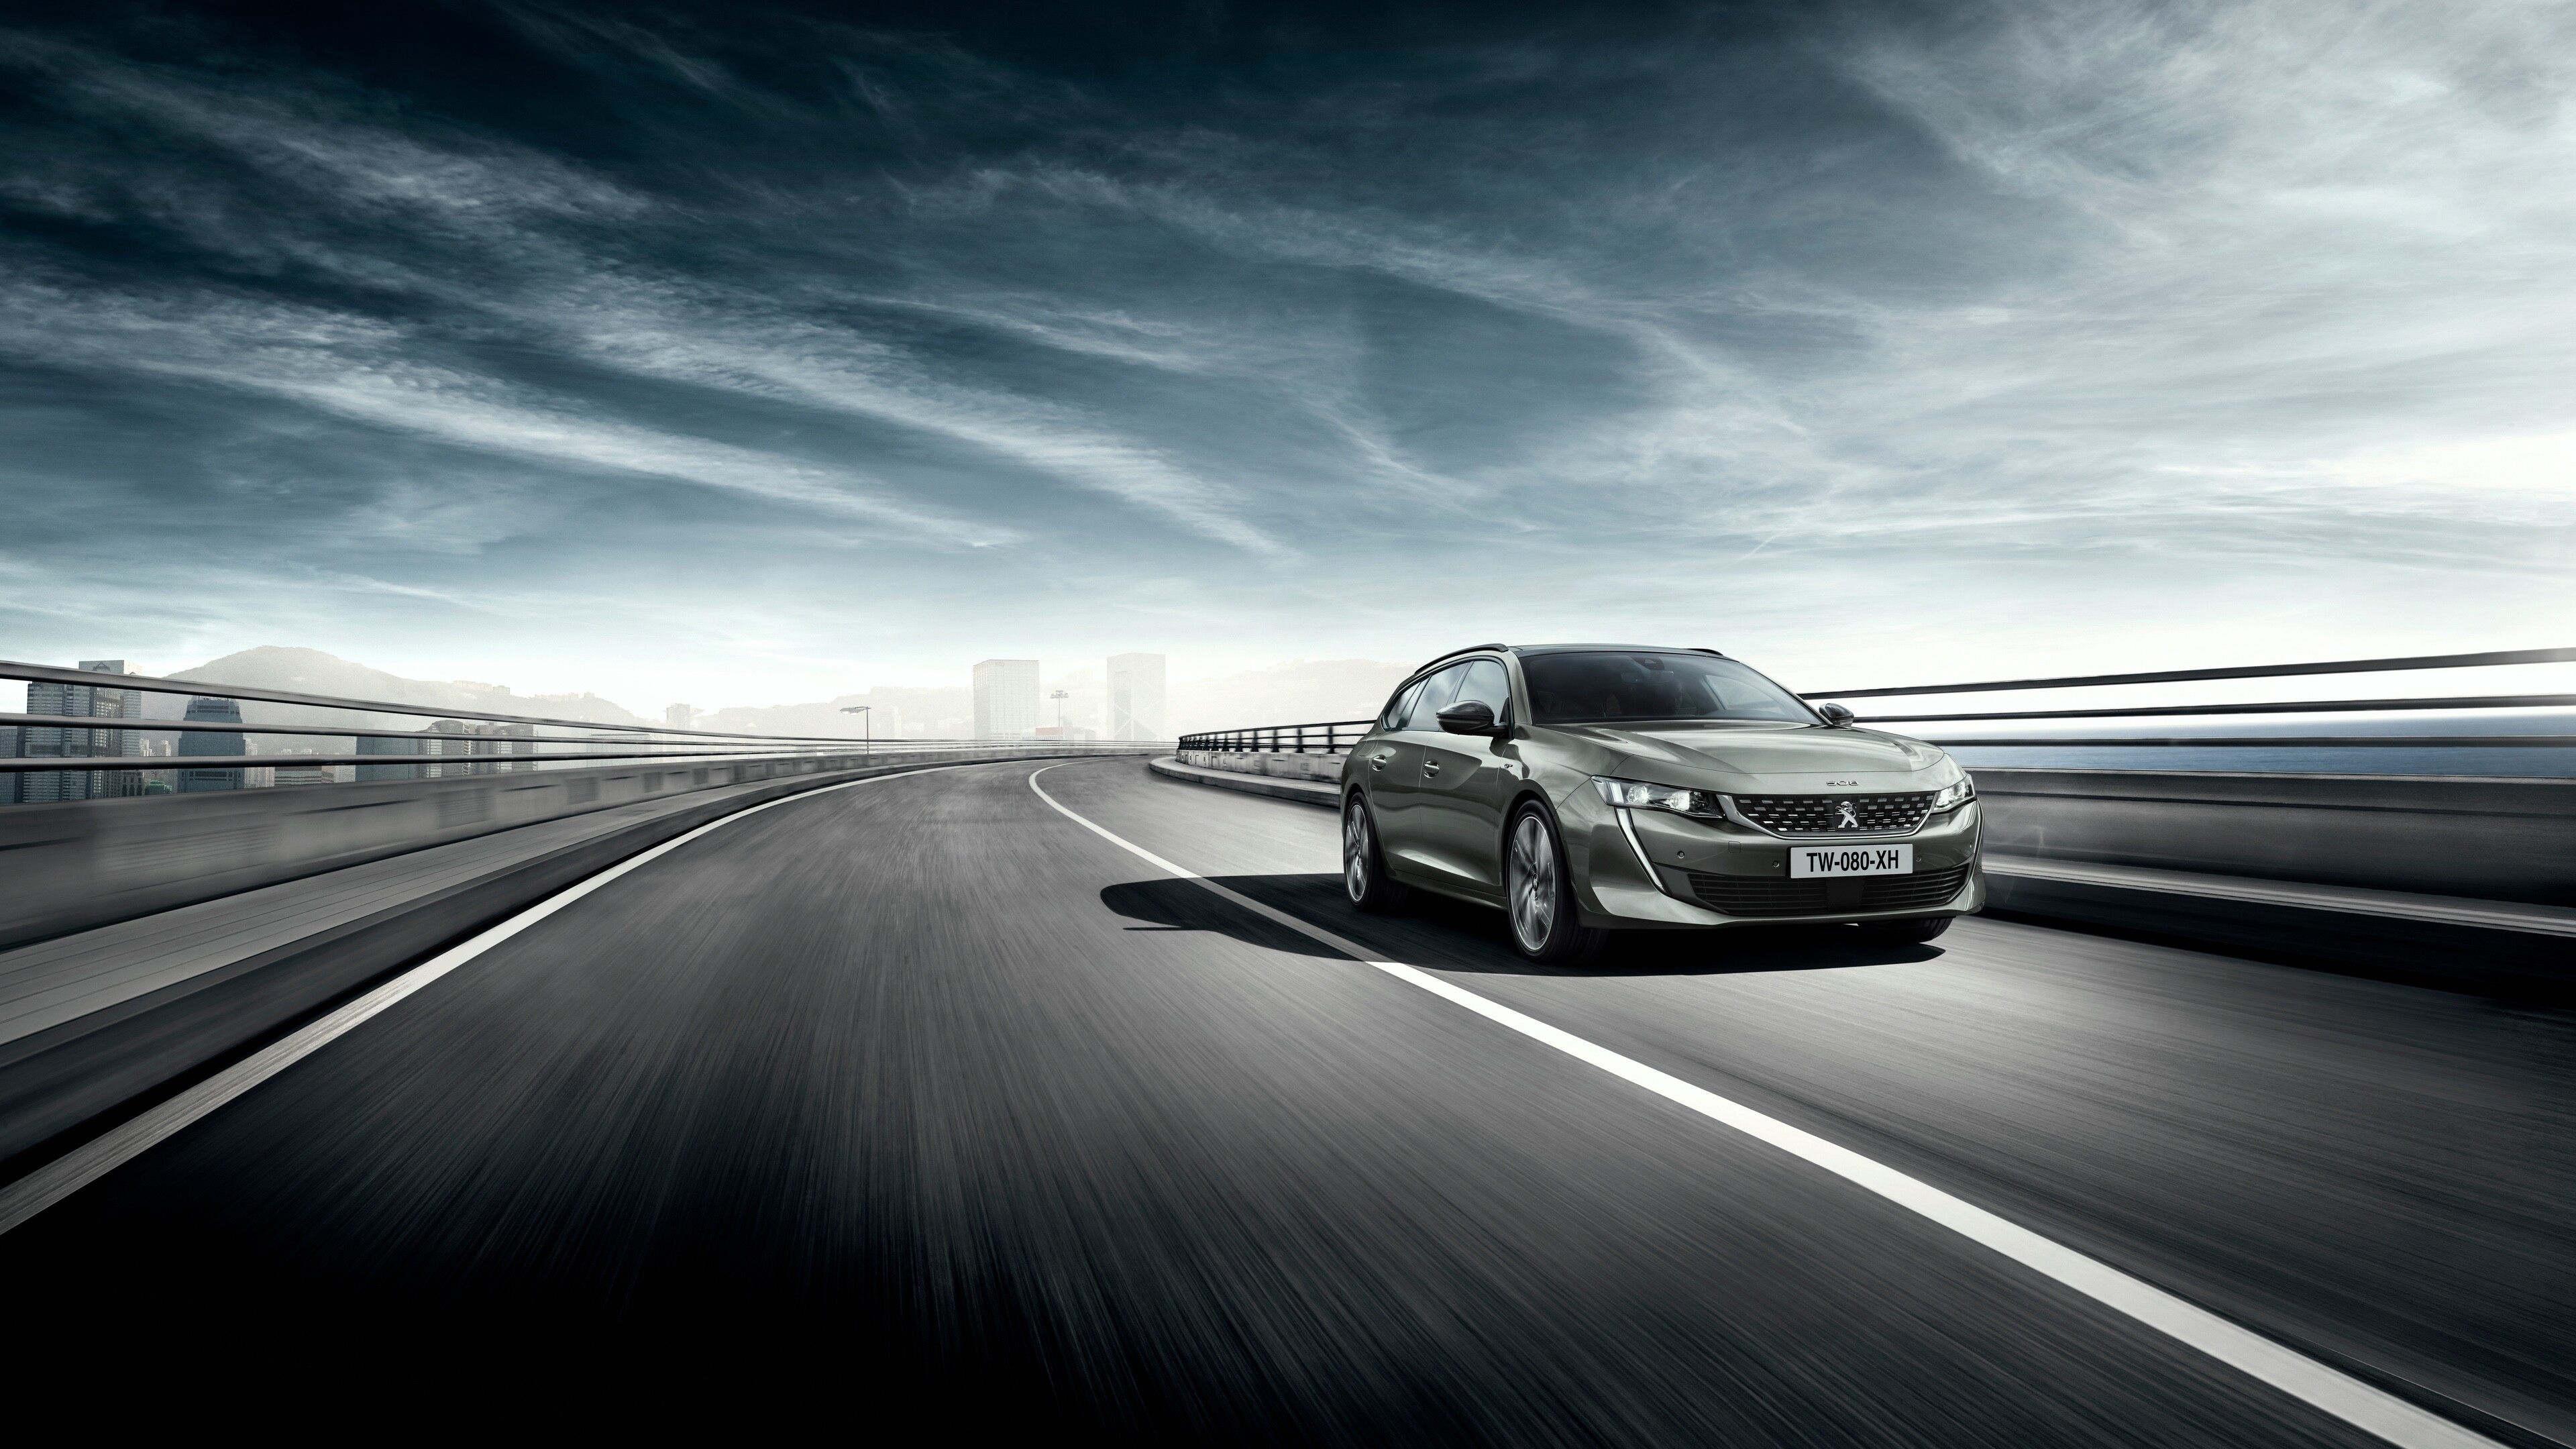 Peugeot: Model 508 SW GT 2018, Movement, Combi, French car. 3840x2160 4K Background.